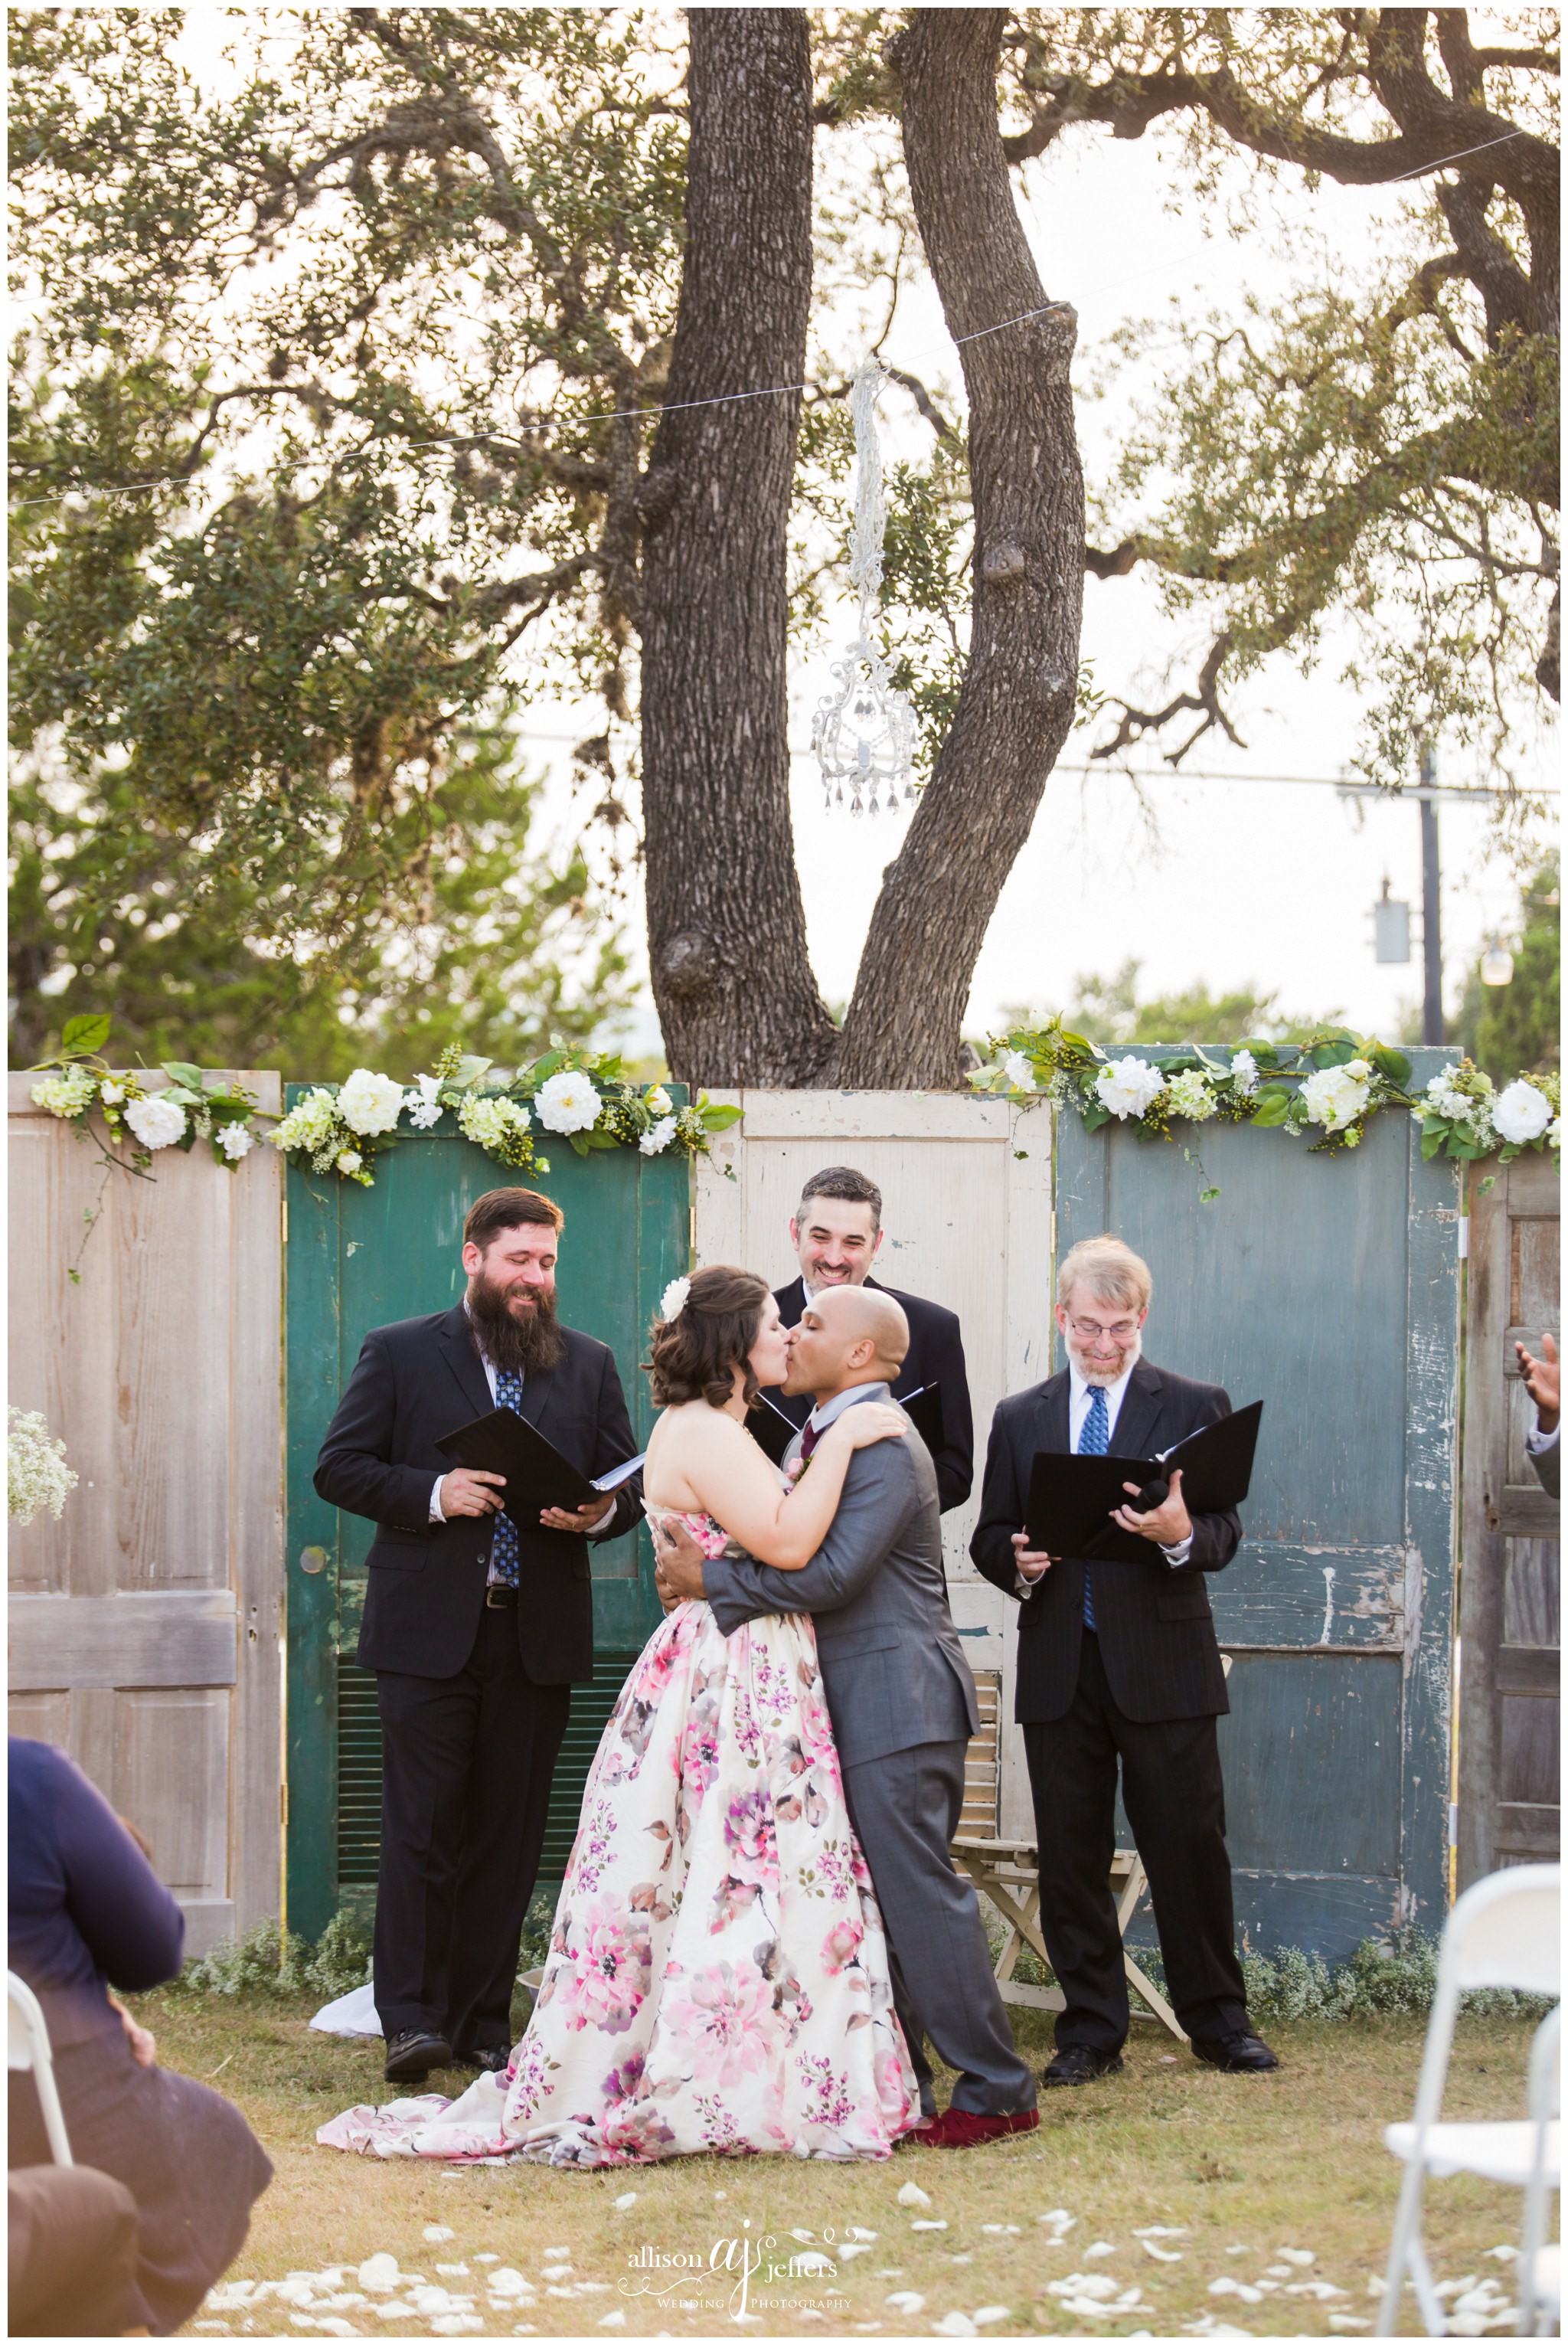 Kerrville Wedding Photographer Unique fun wedding with floral dress 0044